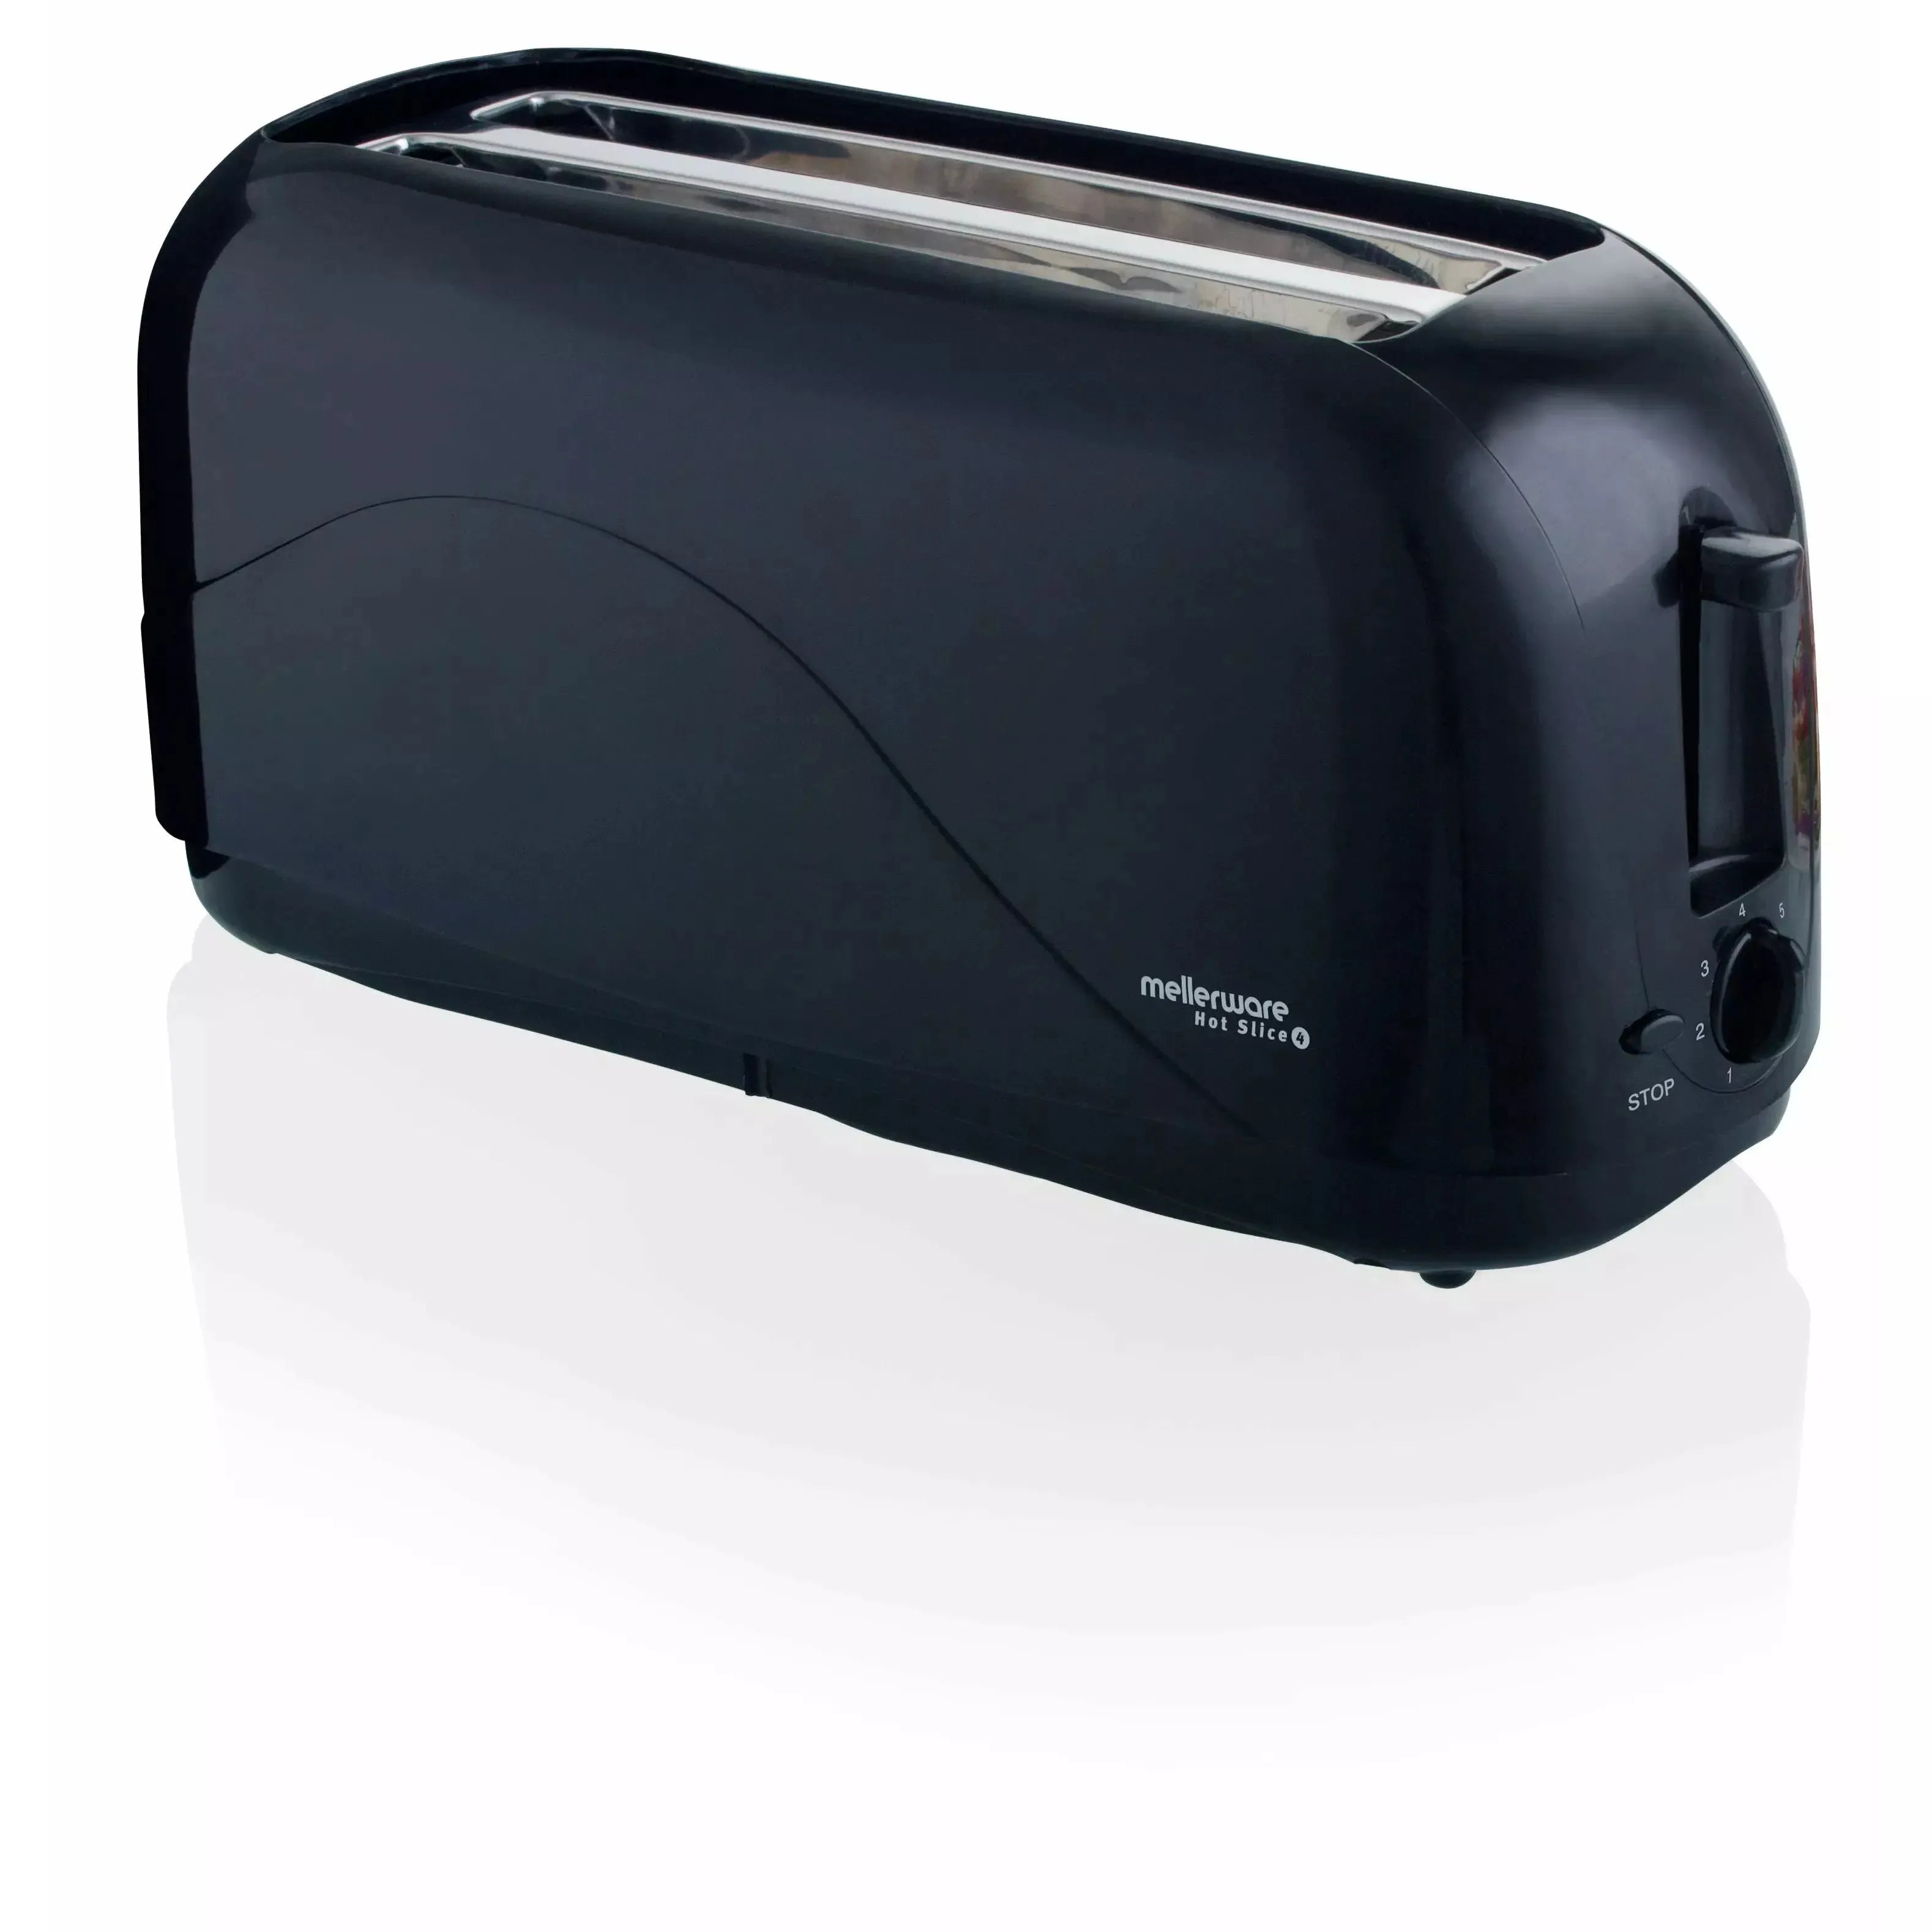 Mellerware 24441 CoolTouch 4 Slice Toaster - Black